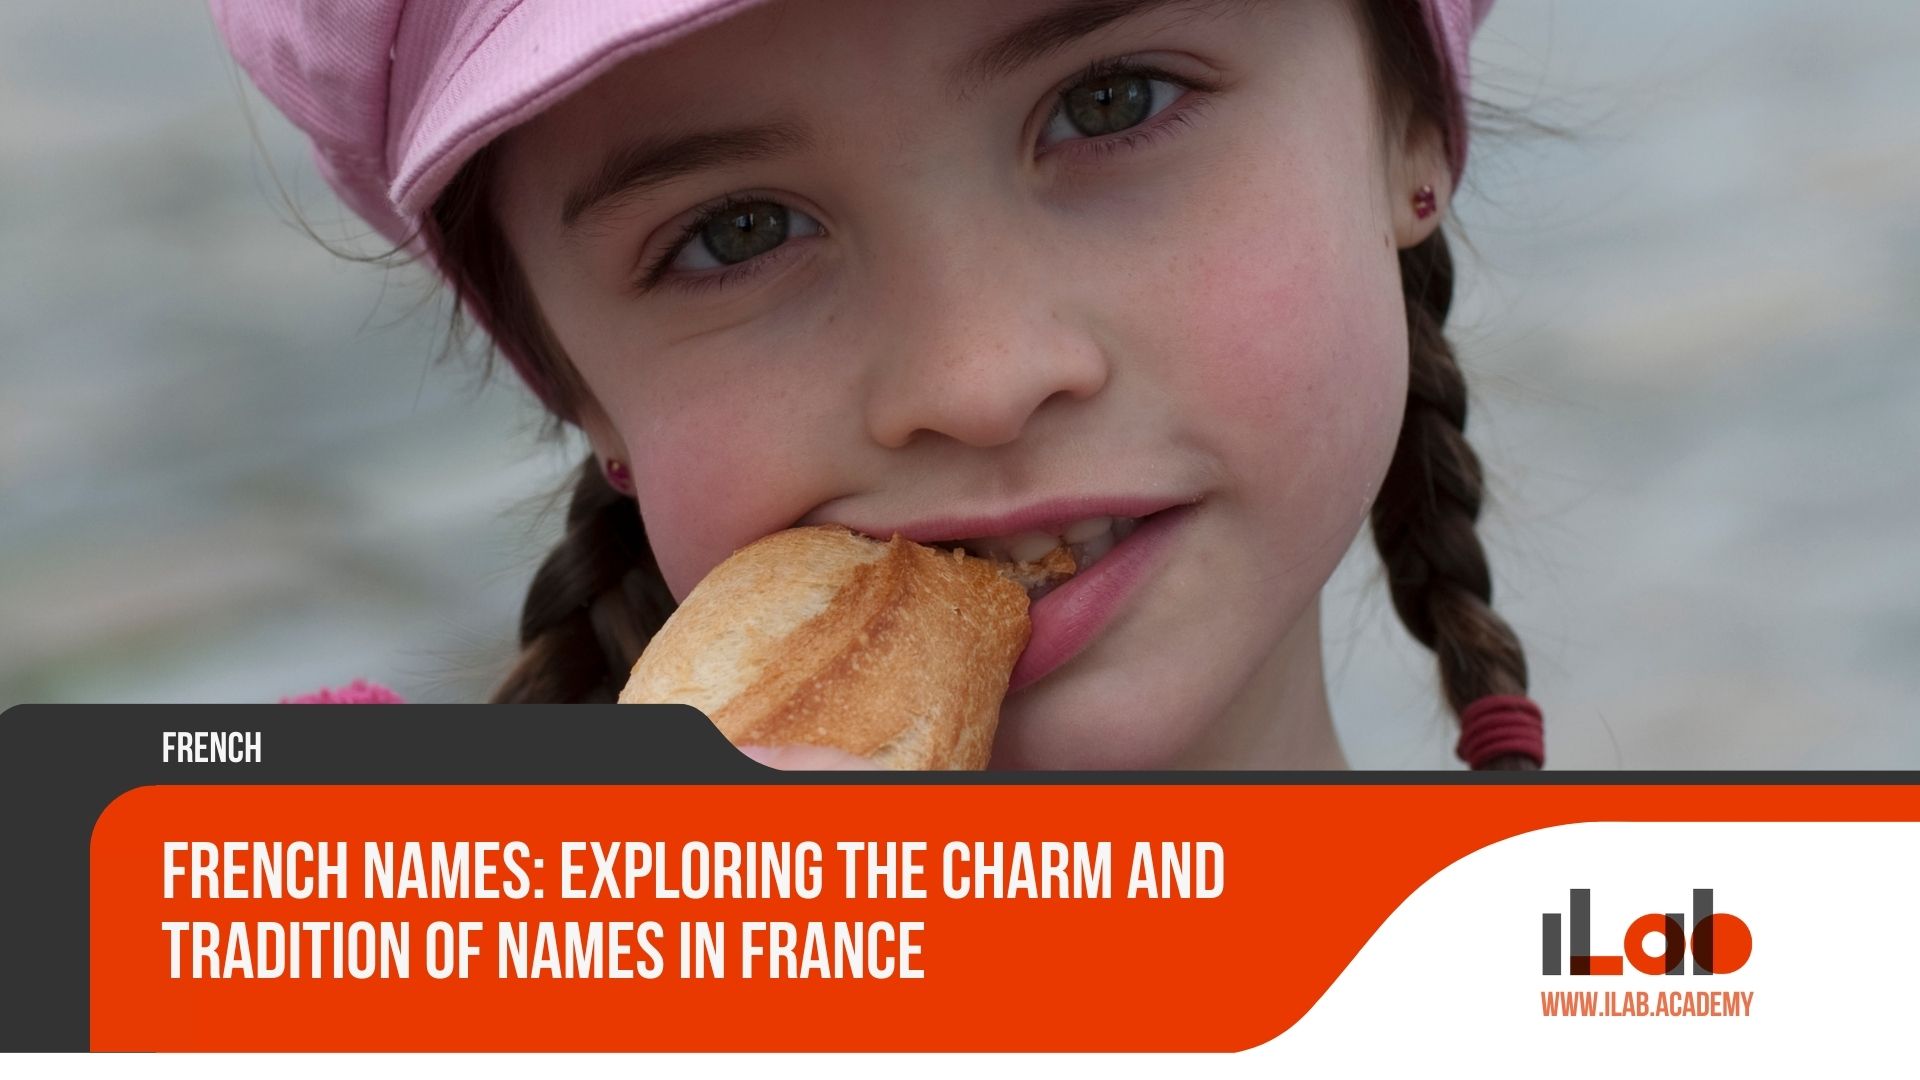 French Names: Exploring the Charm and Tradition of Names in France